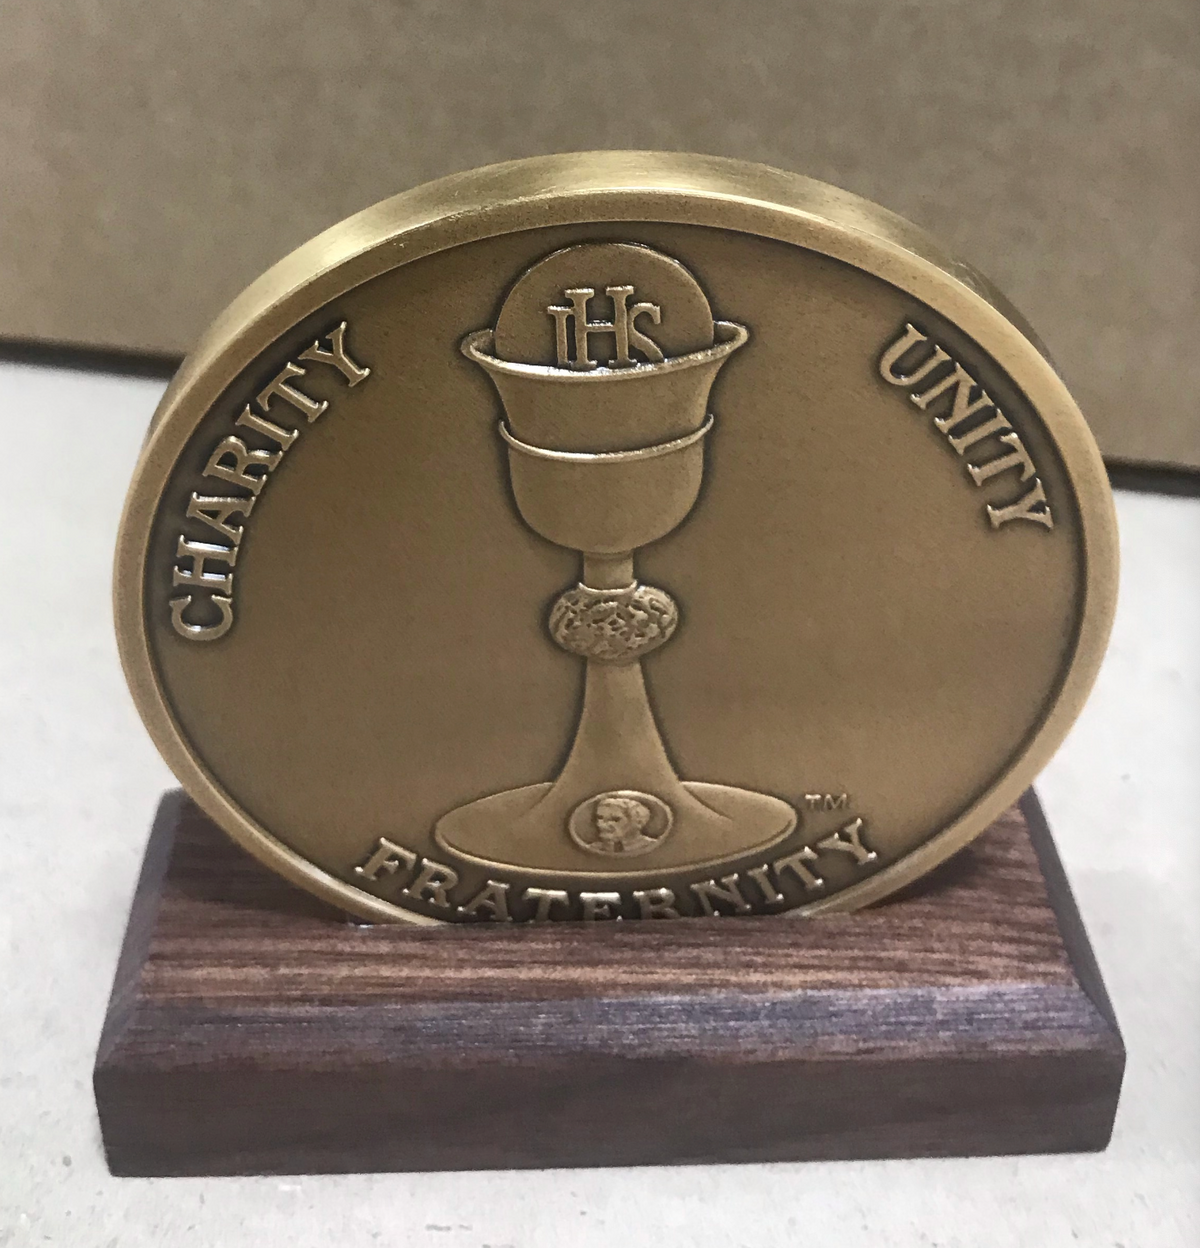 Membership Medallion with wooden stand and case